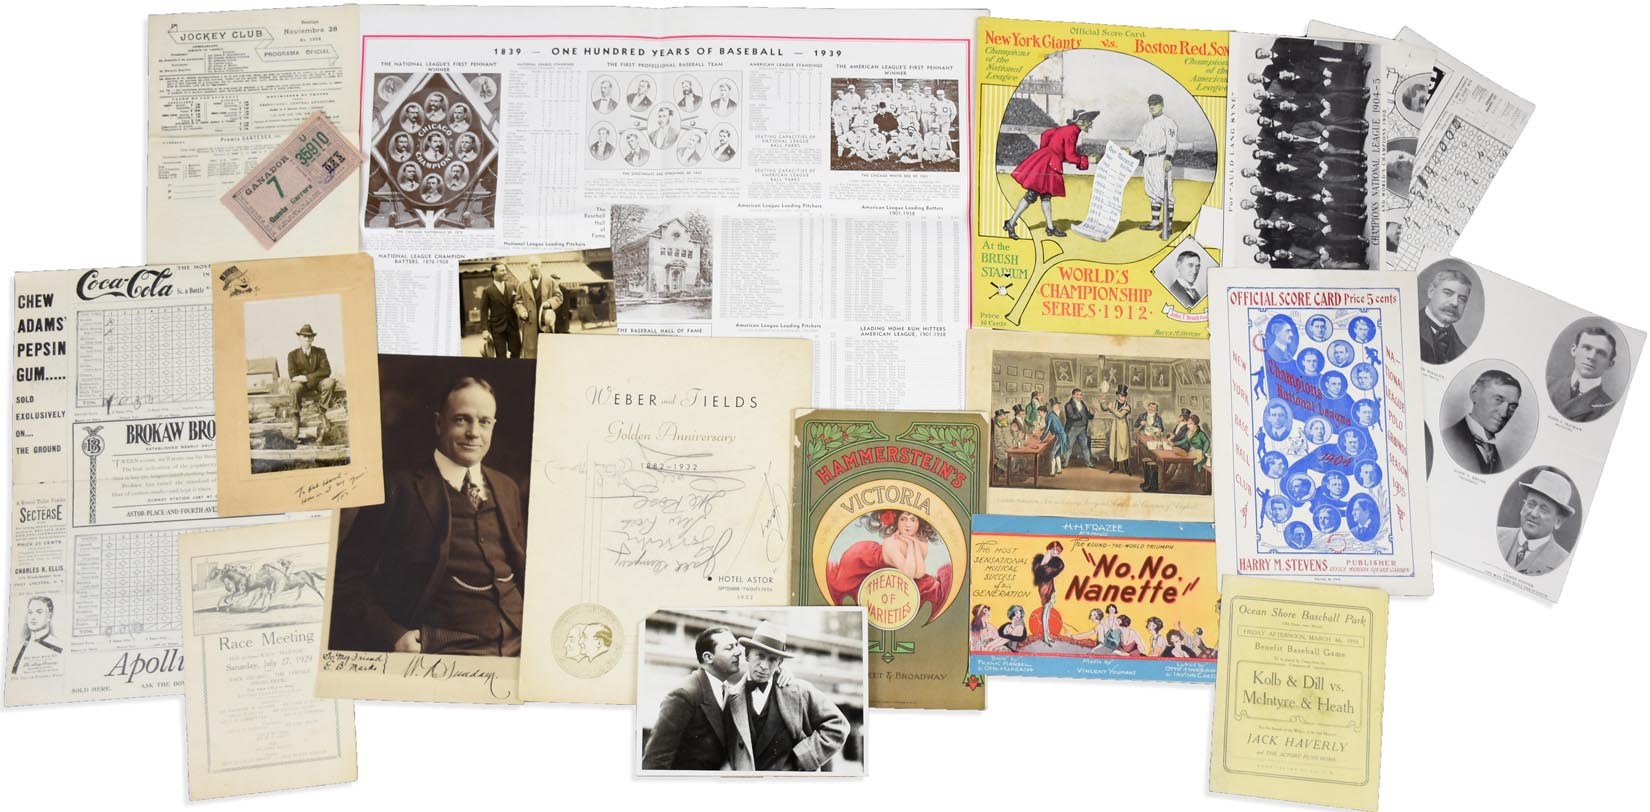 The New Yorker Collection - Fine Baseball, Horse Racing, & Boxing Collection from NY Vaudevillian